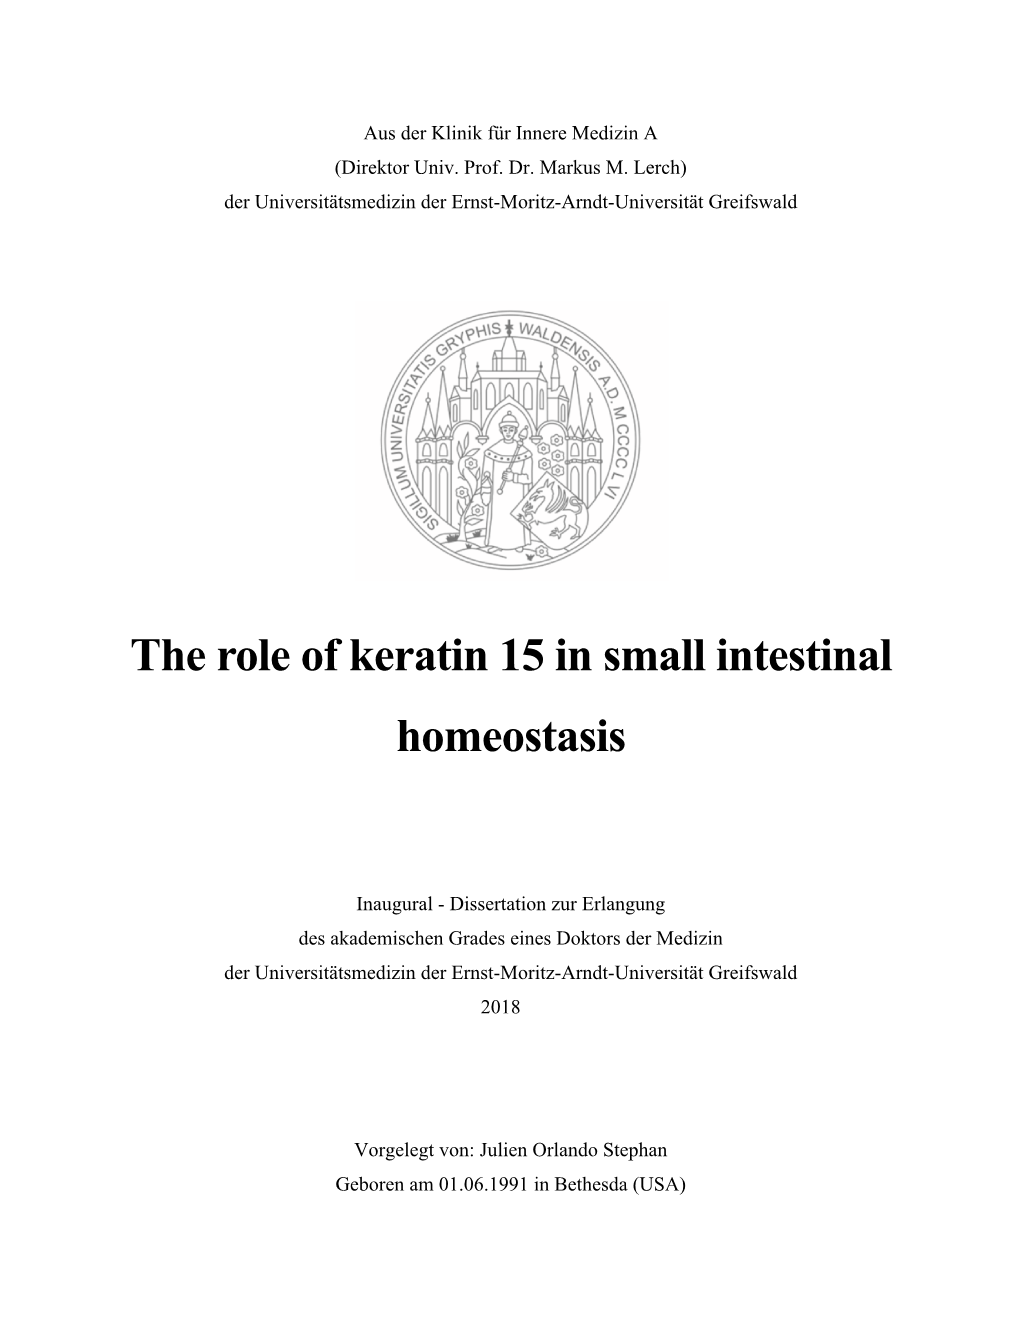 The Role of Keratin 15 in Small Intestinal Homeostasis